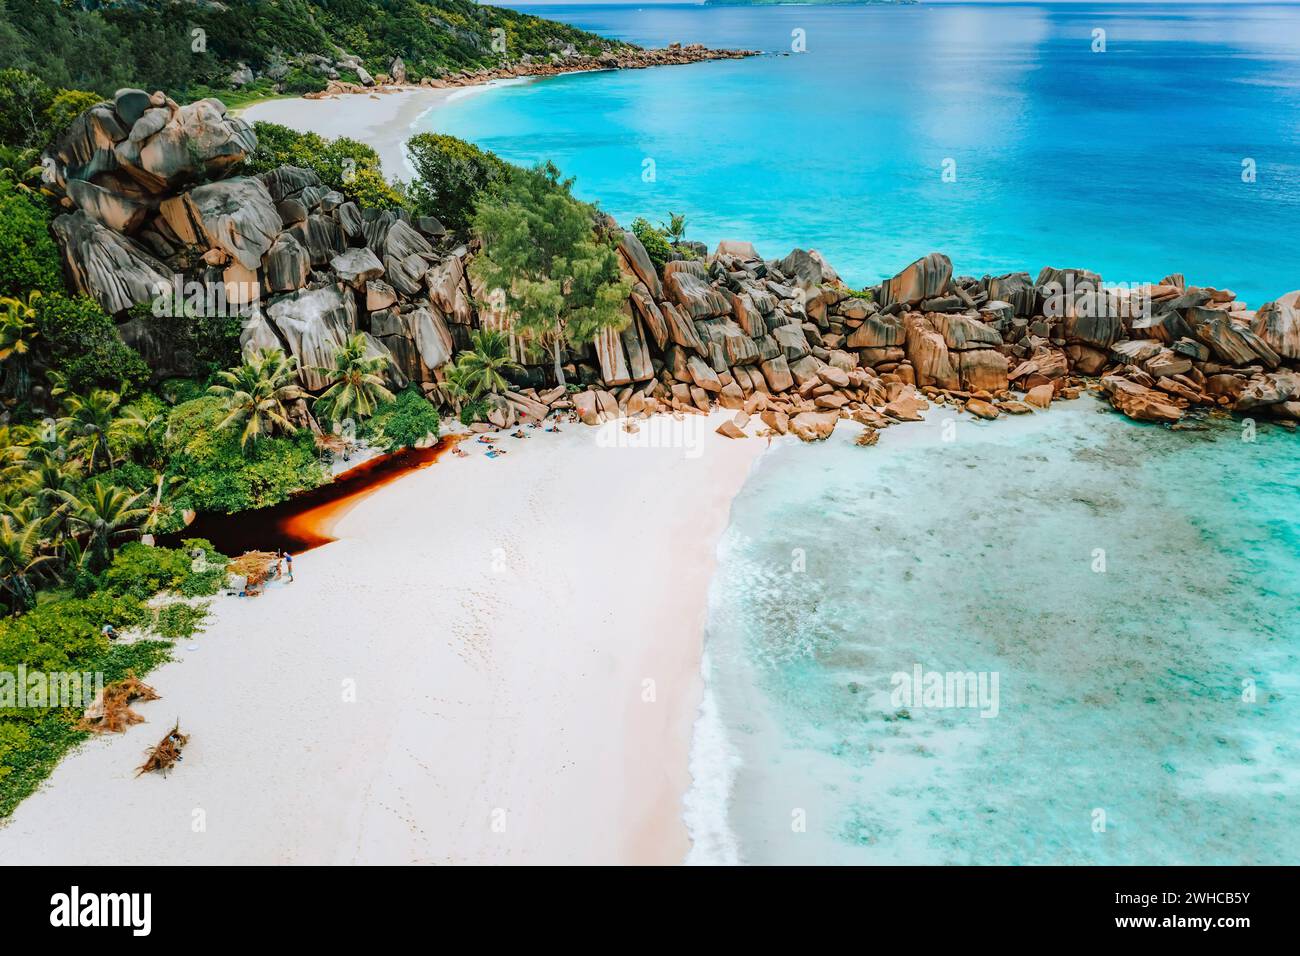 Aerial top view of Seychelles tropical paradise beach with crystal clear turquoise water and bizarre granite rocks. La Digue Island. Stock Photo